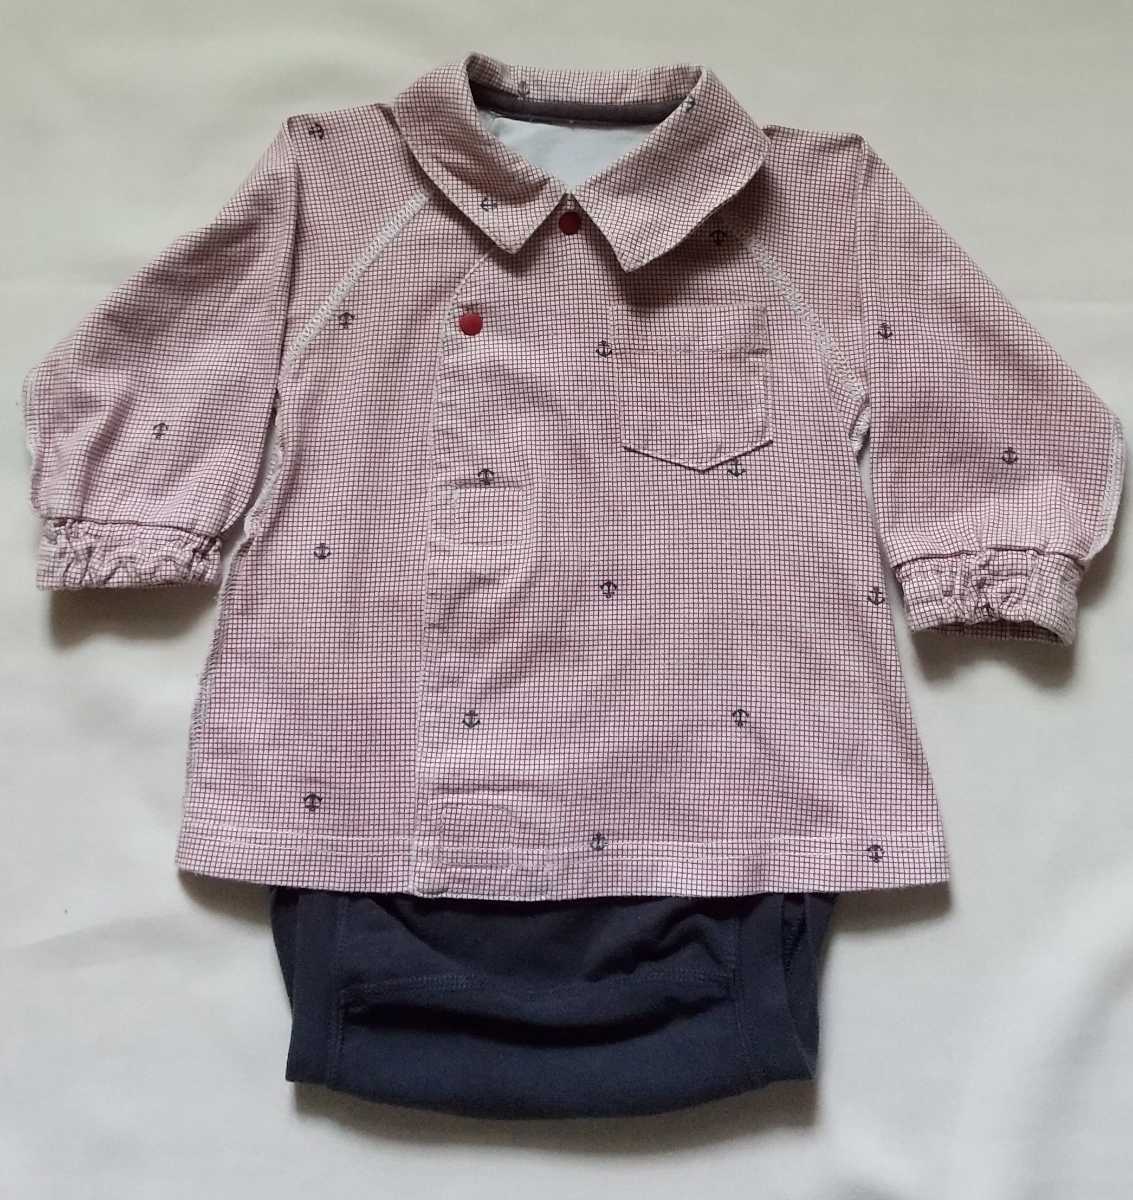  secondhand goods set sale child clothes baby Kids long sleeve blouse manner + rompers ( LAP compact )1 point long sleeve shirt 1 point 80 size 